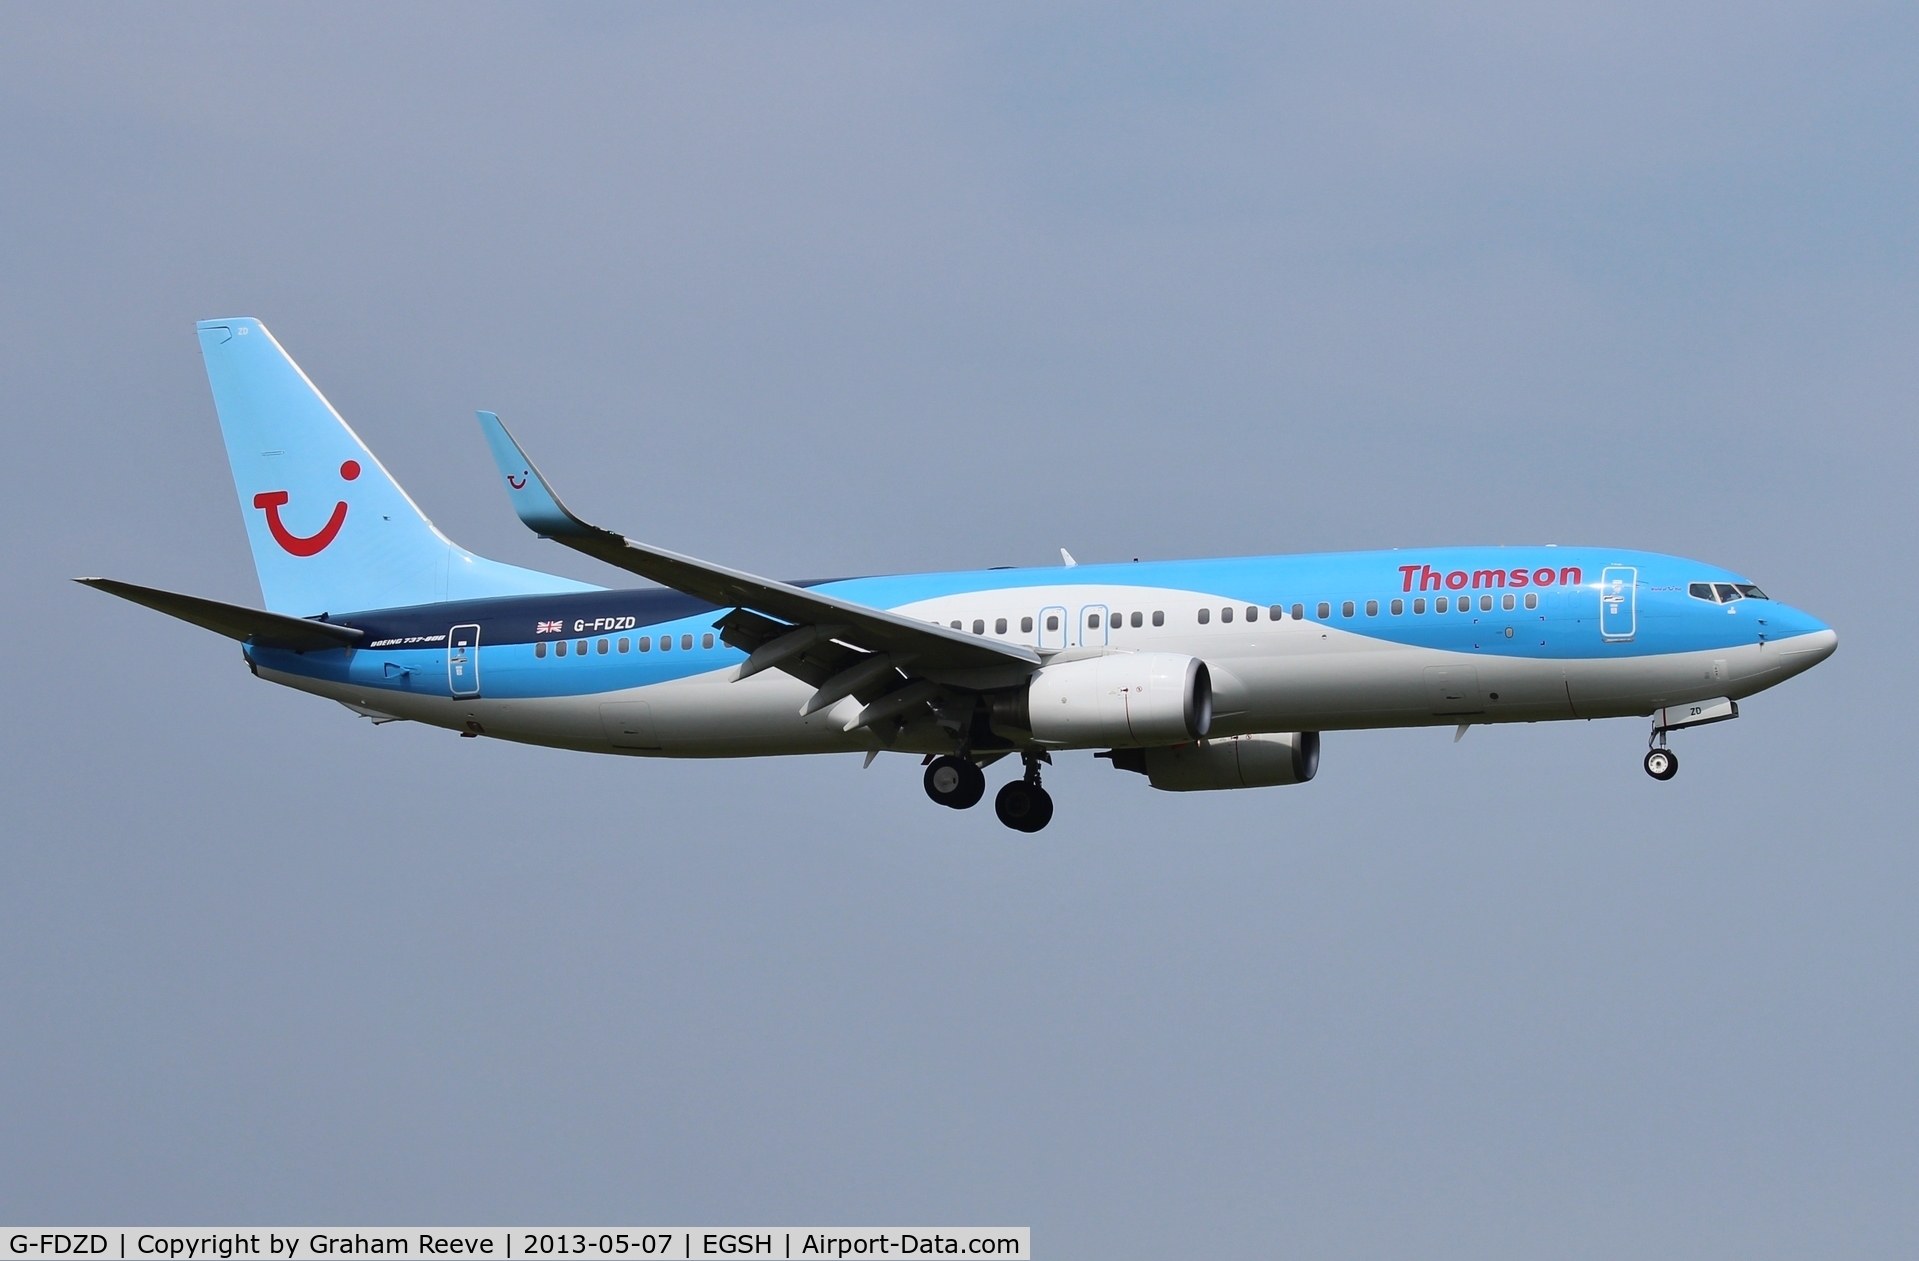 G-FDZD, 2007 Boeing 737-8K5 C/N 35132, On finals to runway 09 at Norwich.